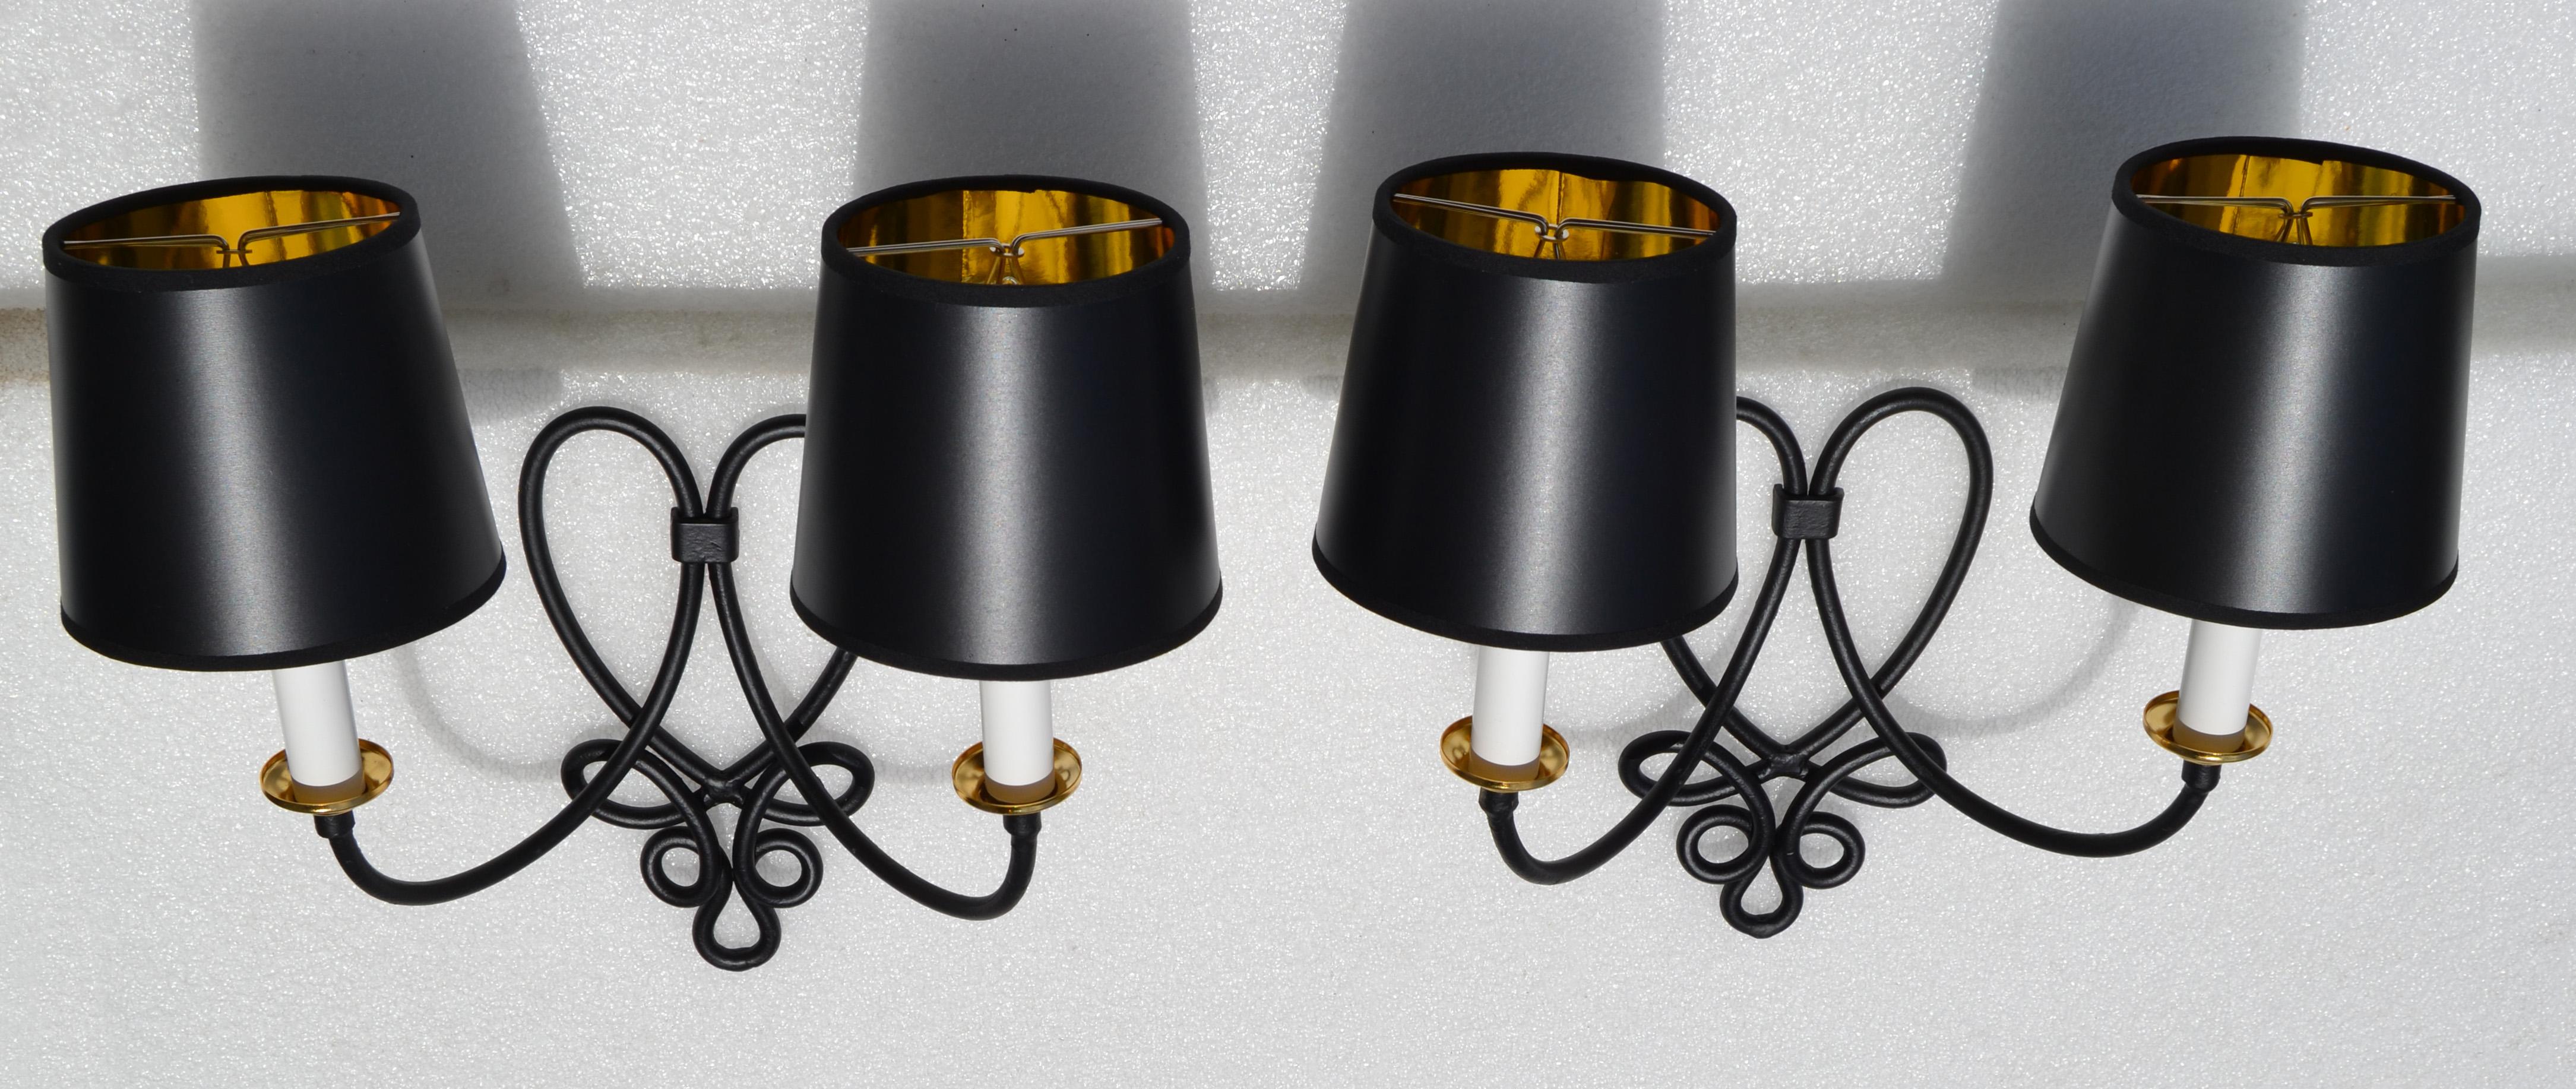 Pair, Rene Prou French 2 Lights Wrought Iron & Brass Wall Sconces Black Finish For Sale 8